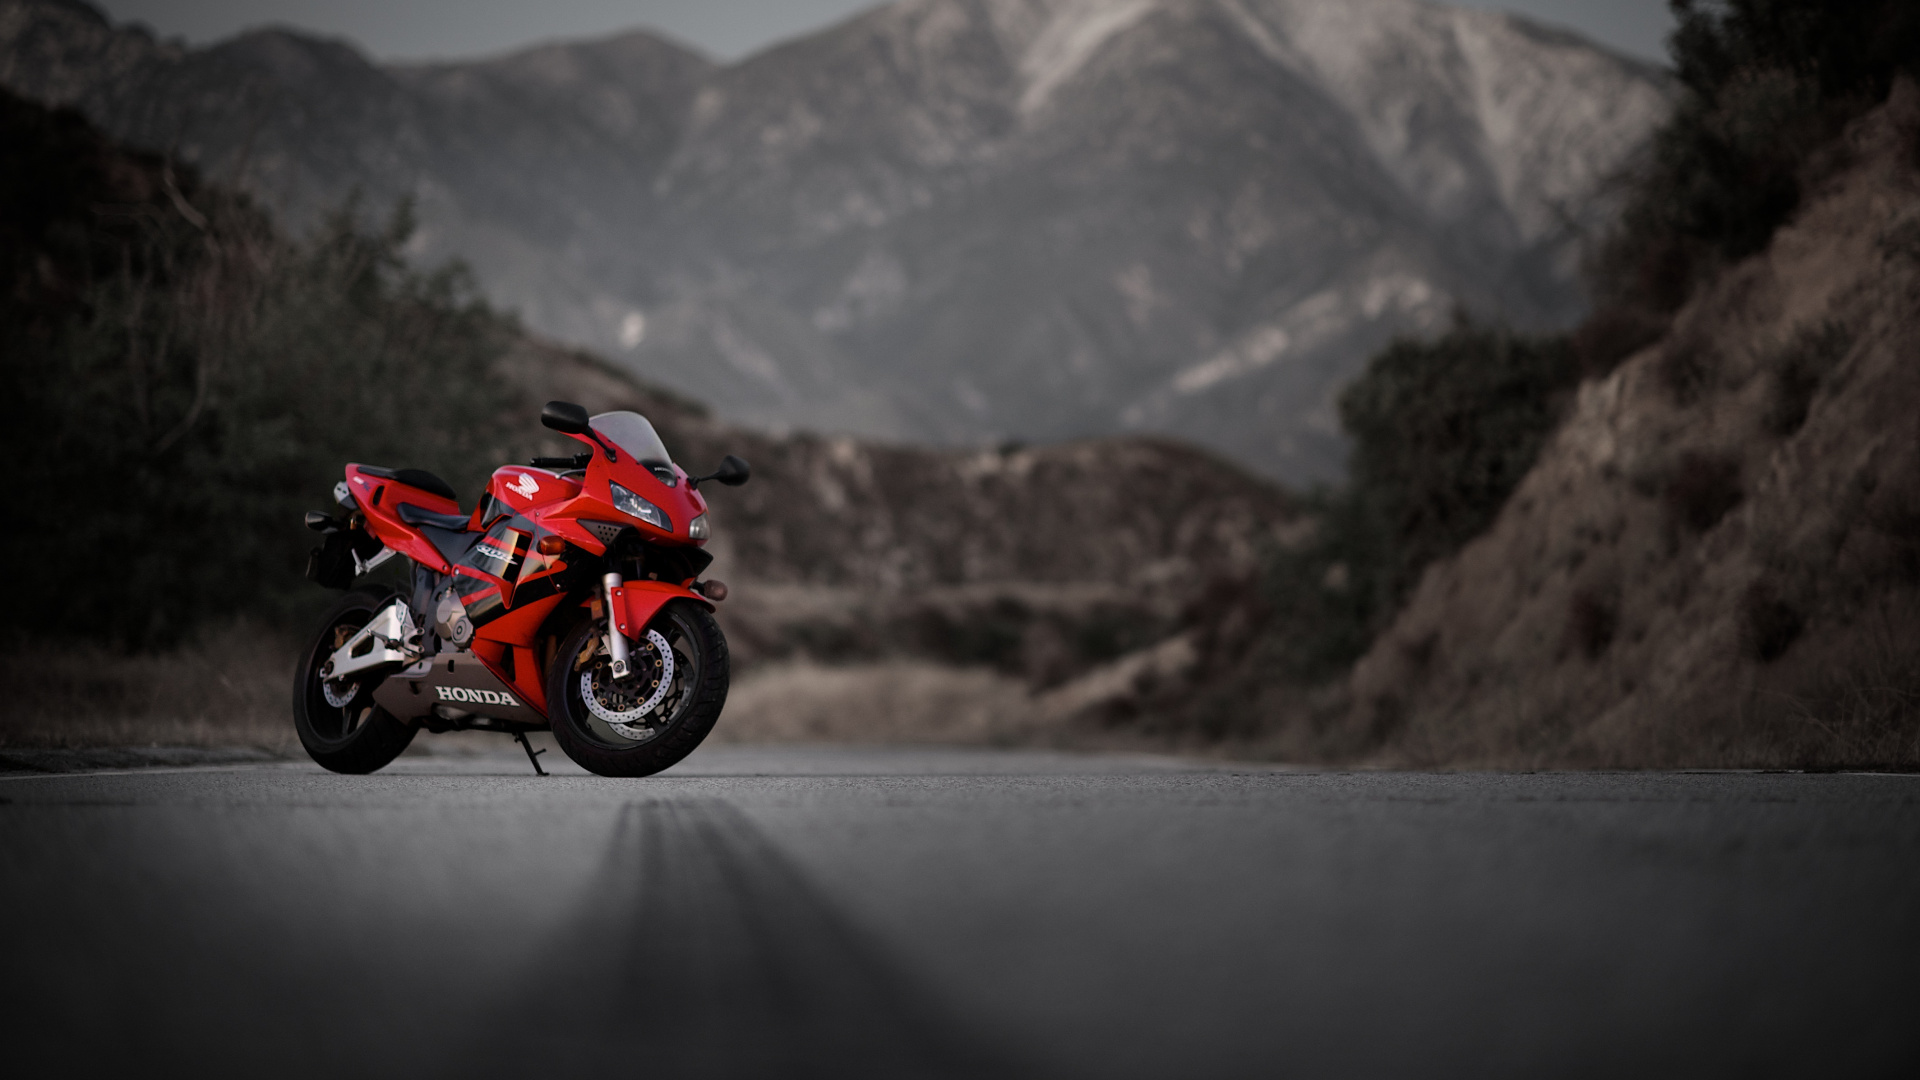 Red and Black Sports Bike on Road During Daytime. Wallpaper in 1920x1080 Resolution